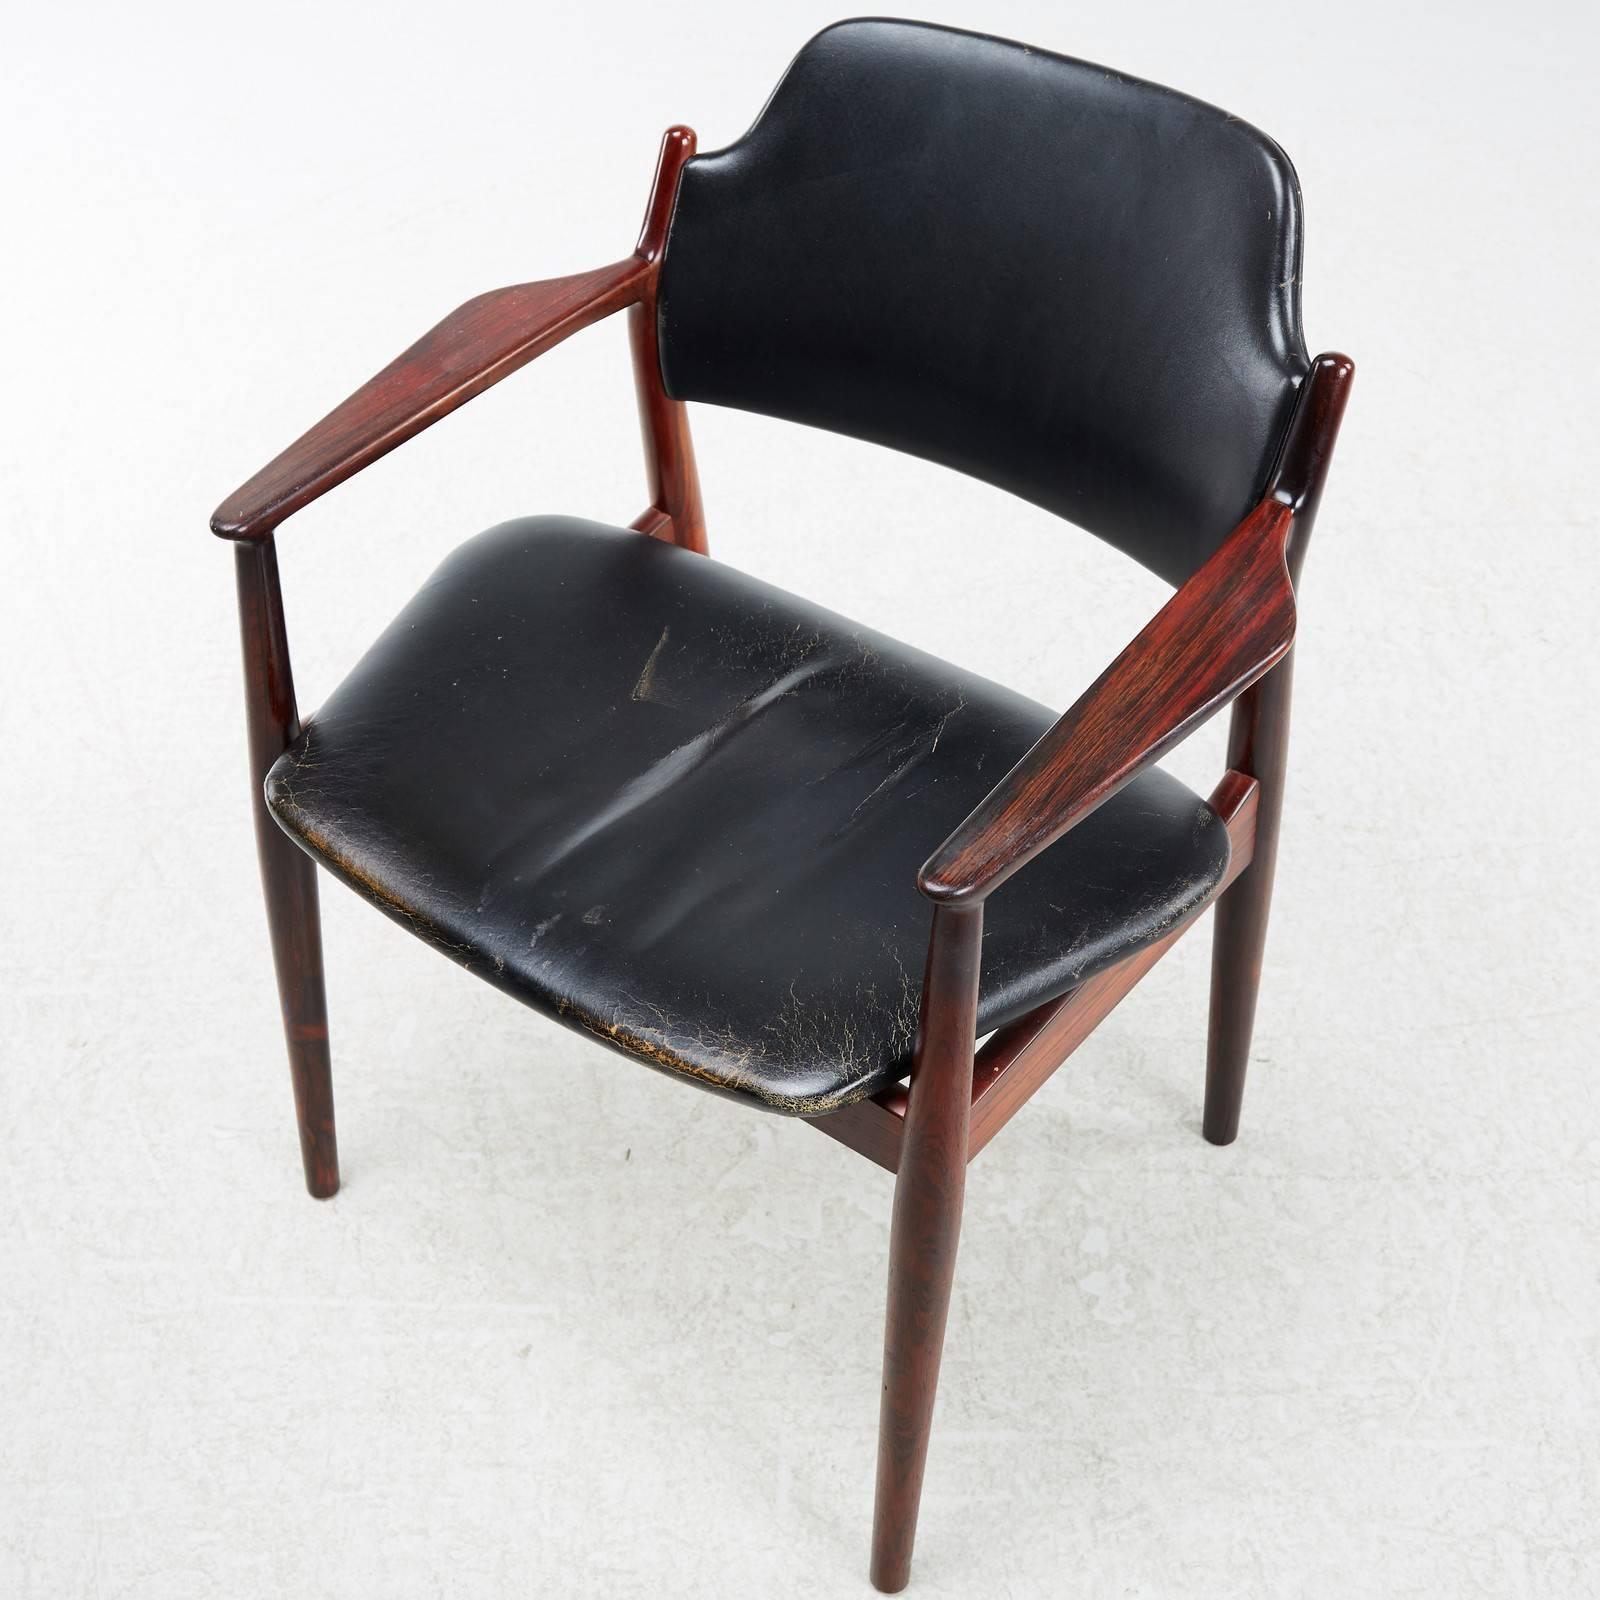 Danish 1960s Arne Vodder Rosewood Armchairs by Sibast Møbler Inc Re-Upholstery